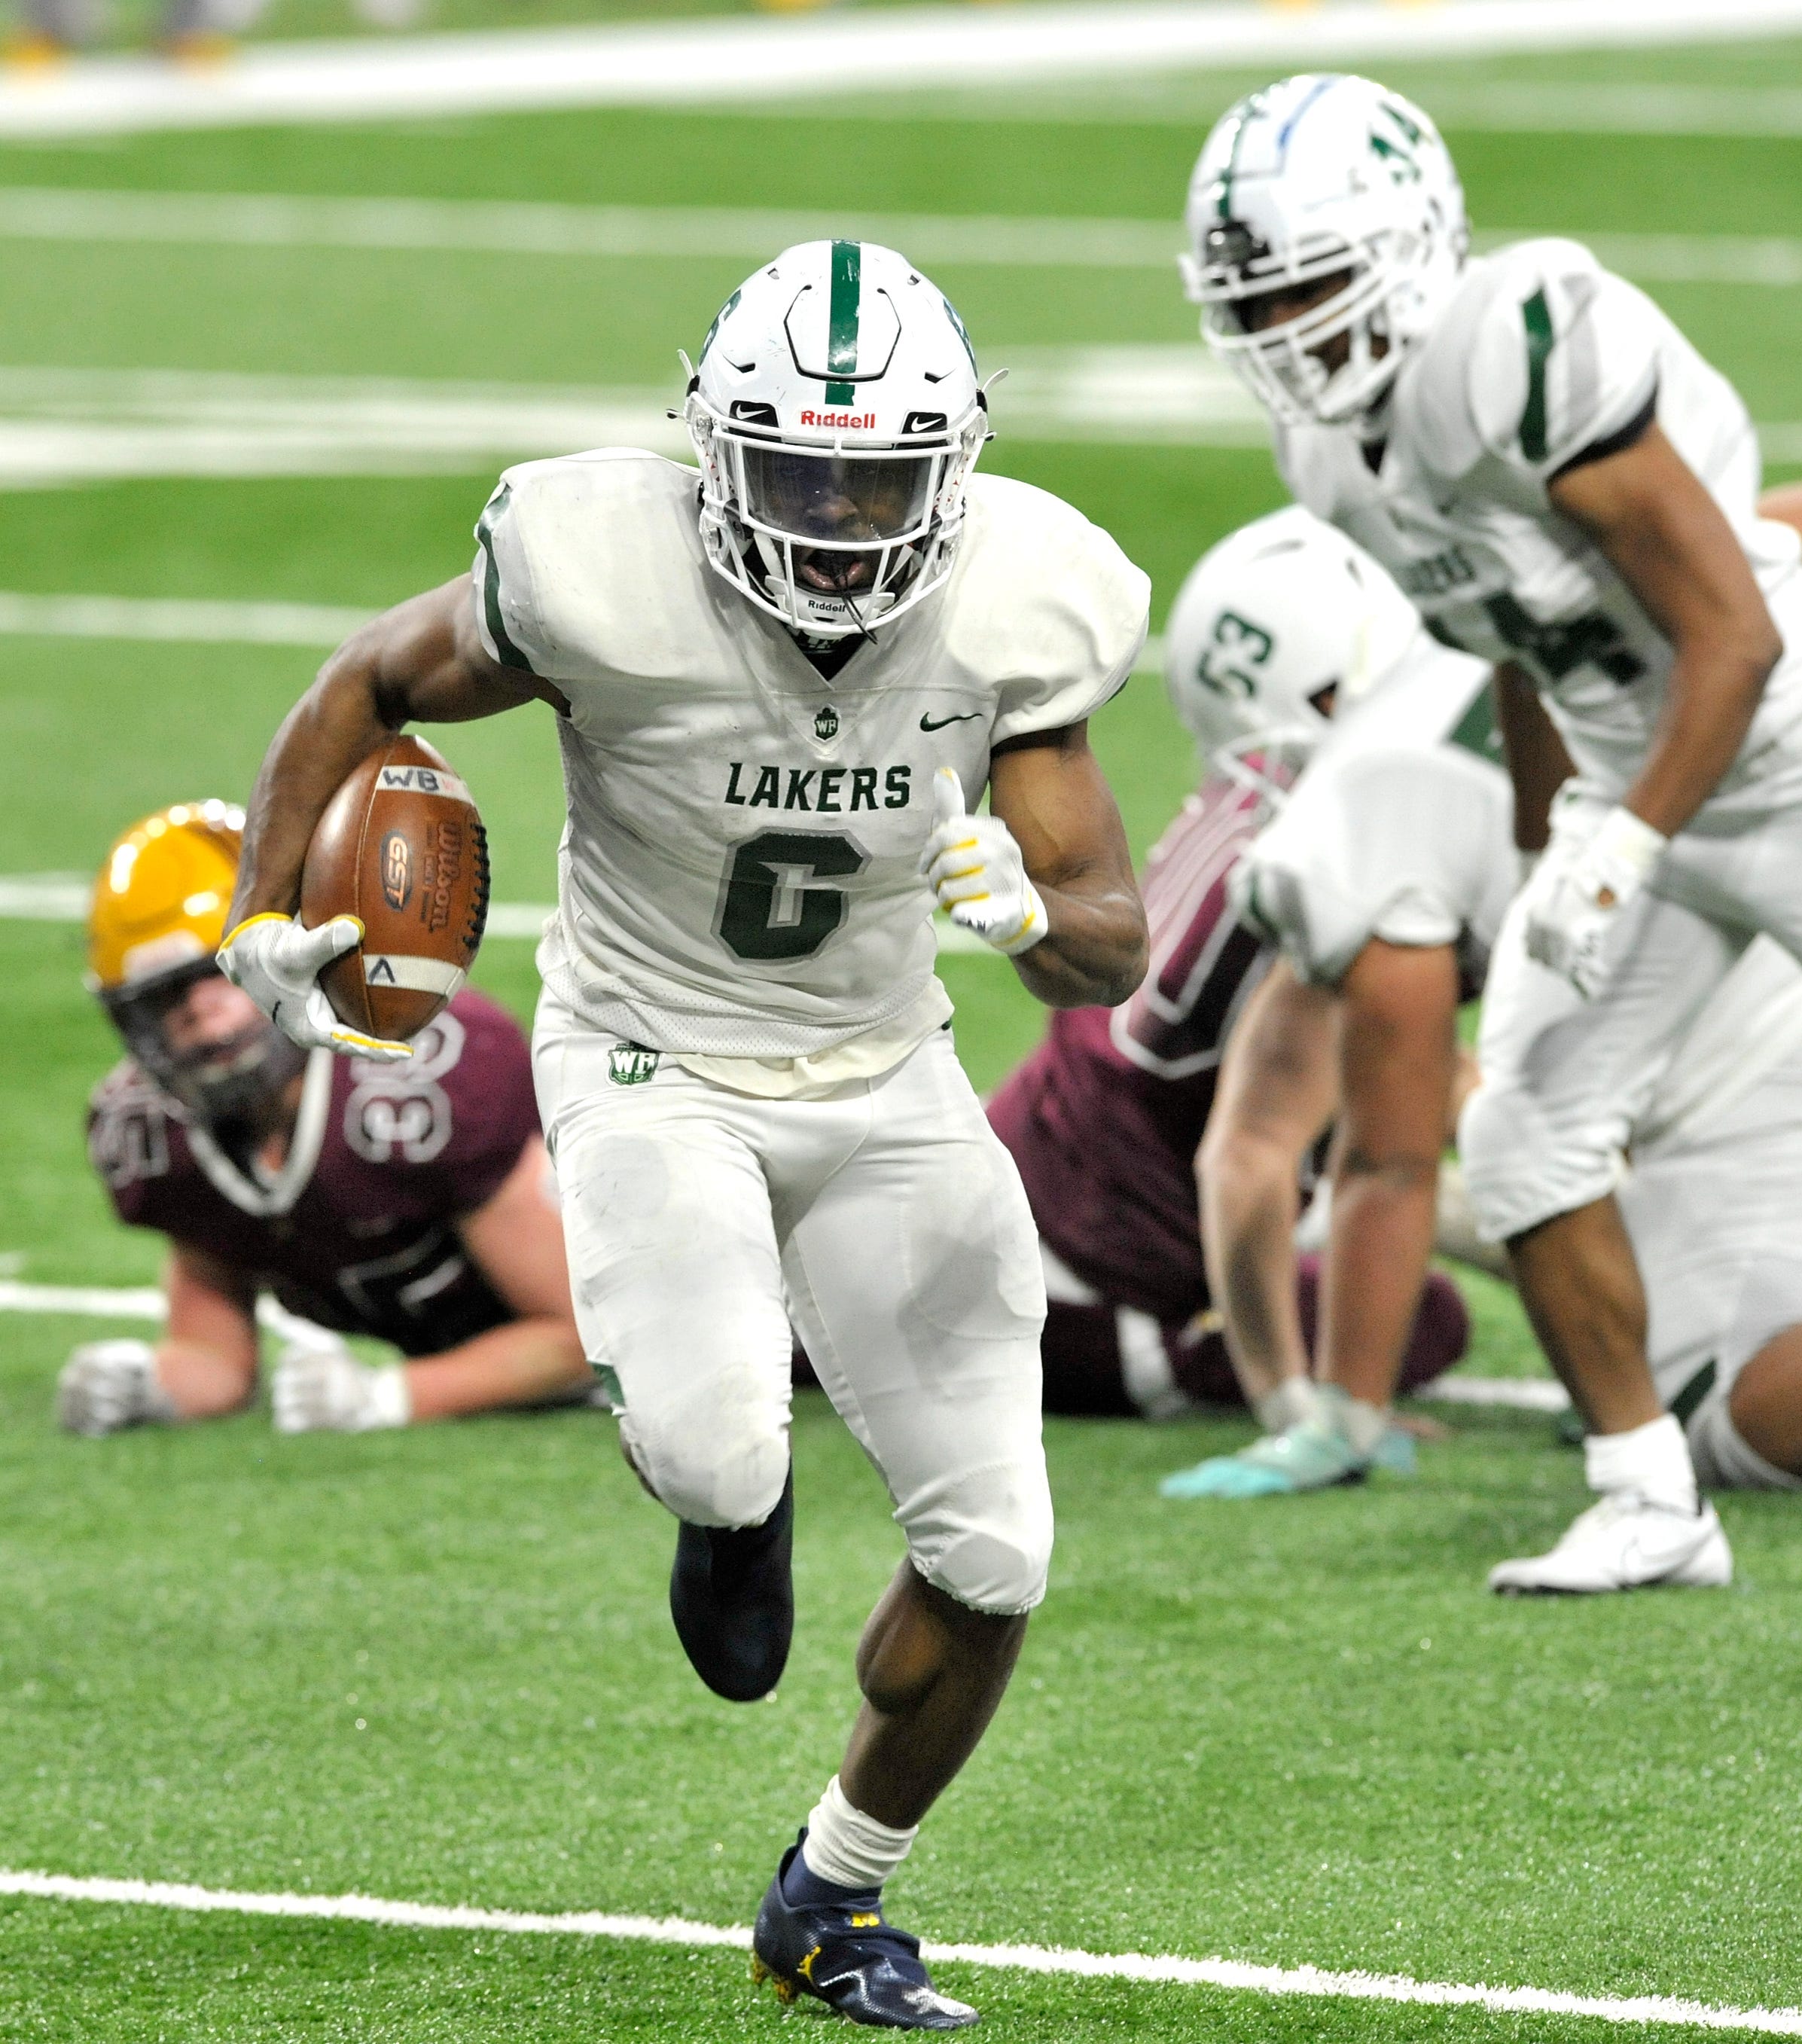 West Bloomfield's Donovan Edwards (6) rushes for a touchdown near the end of the third quarter.